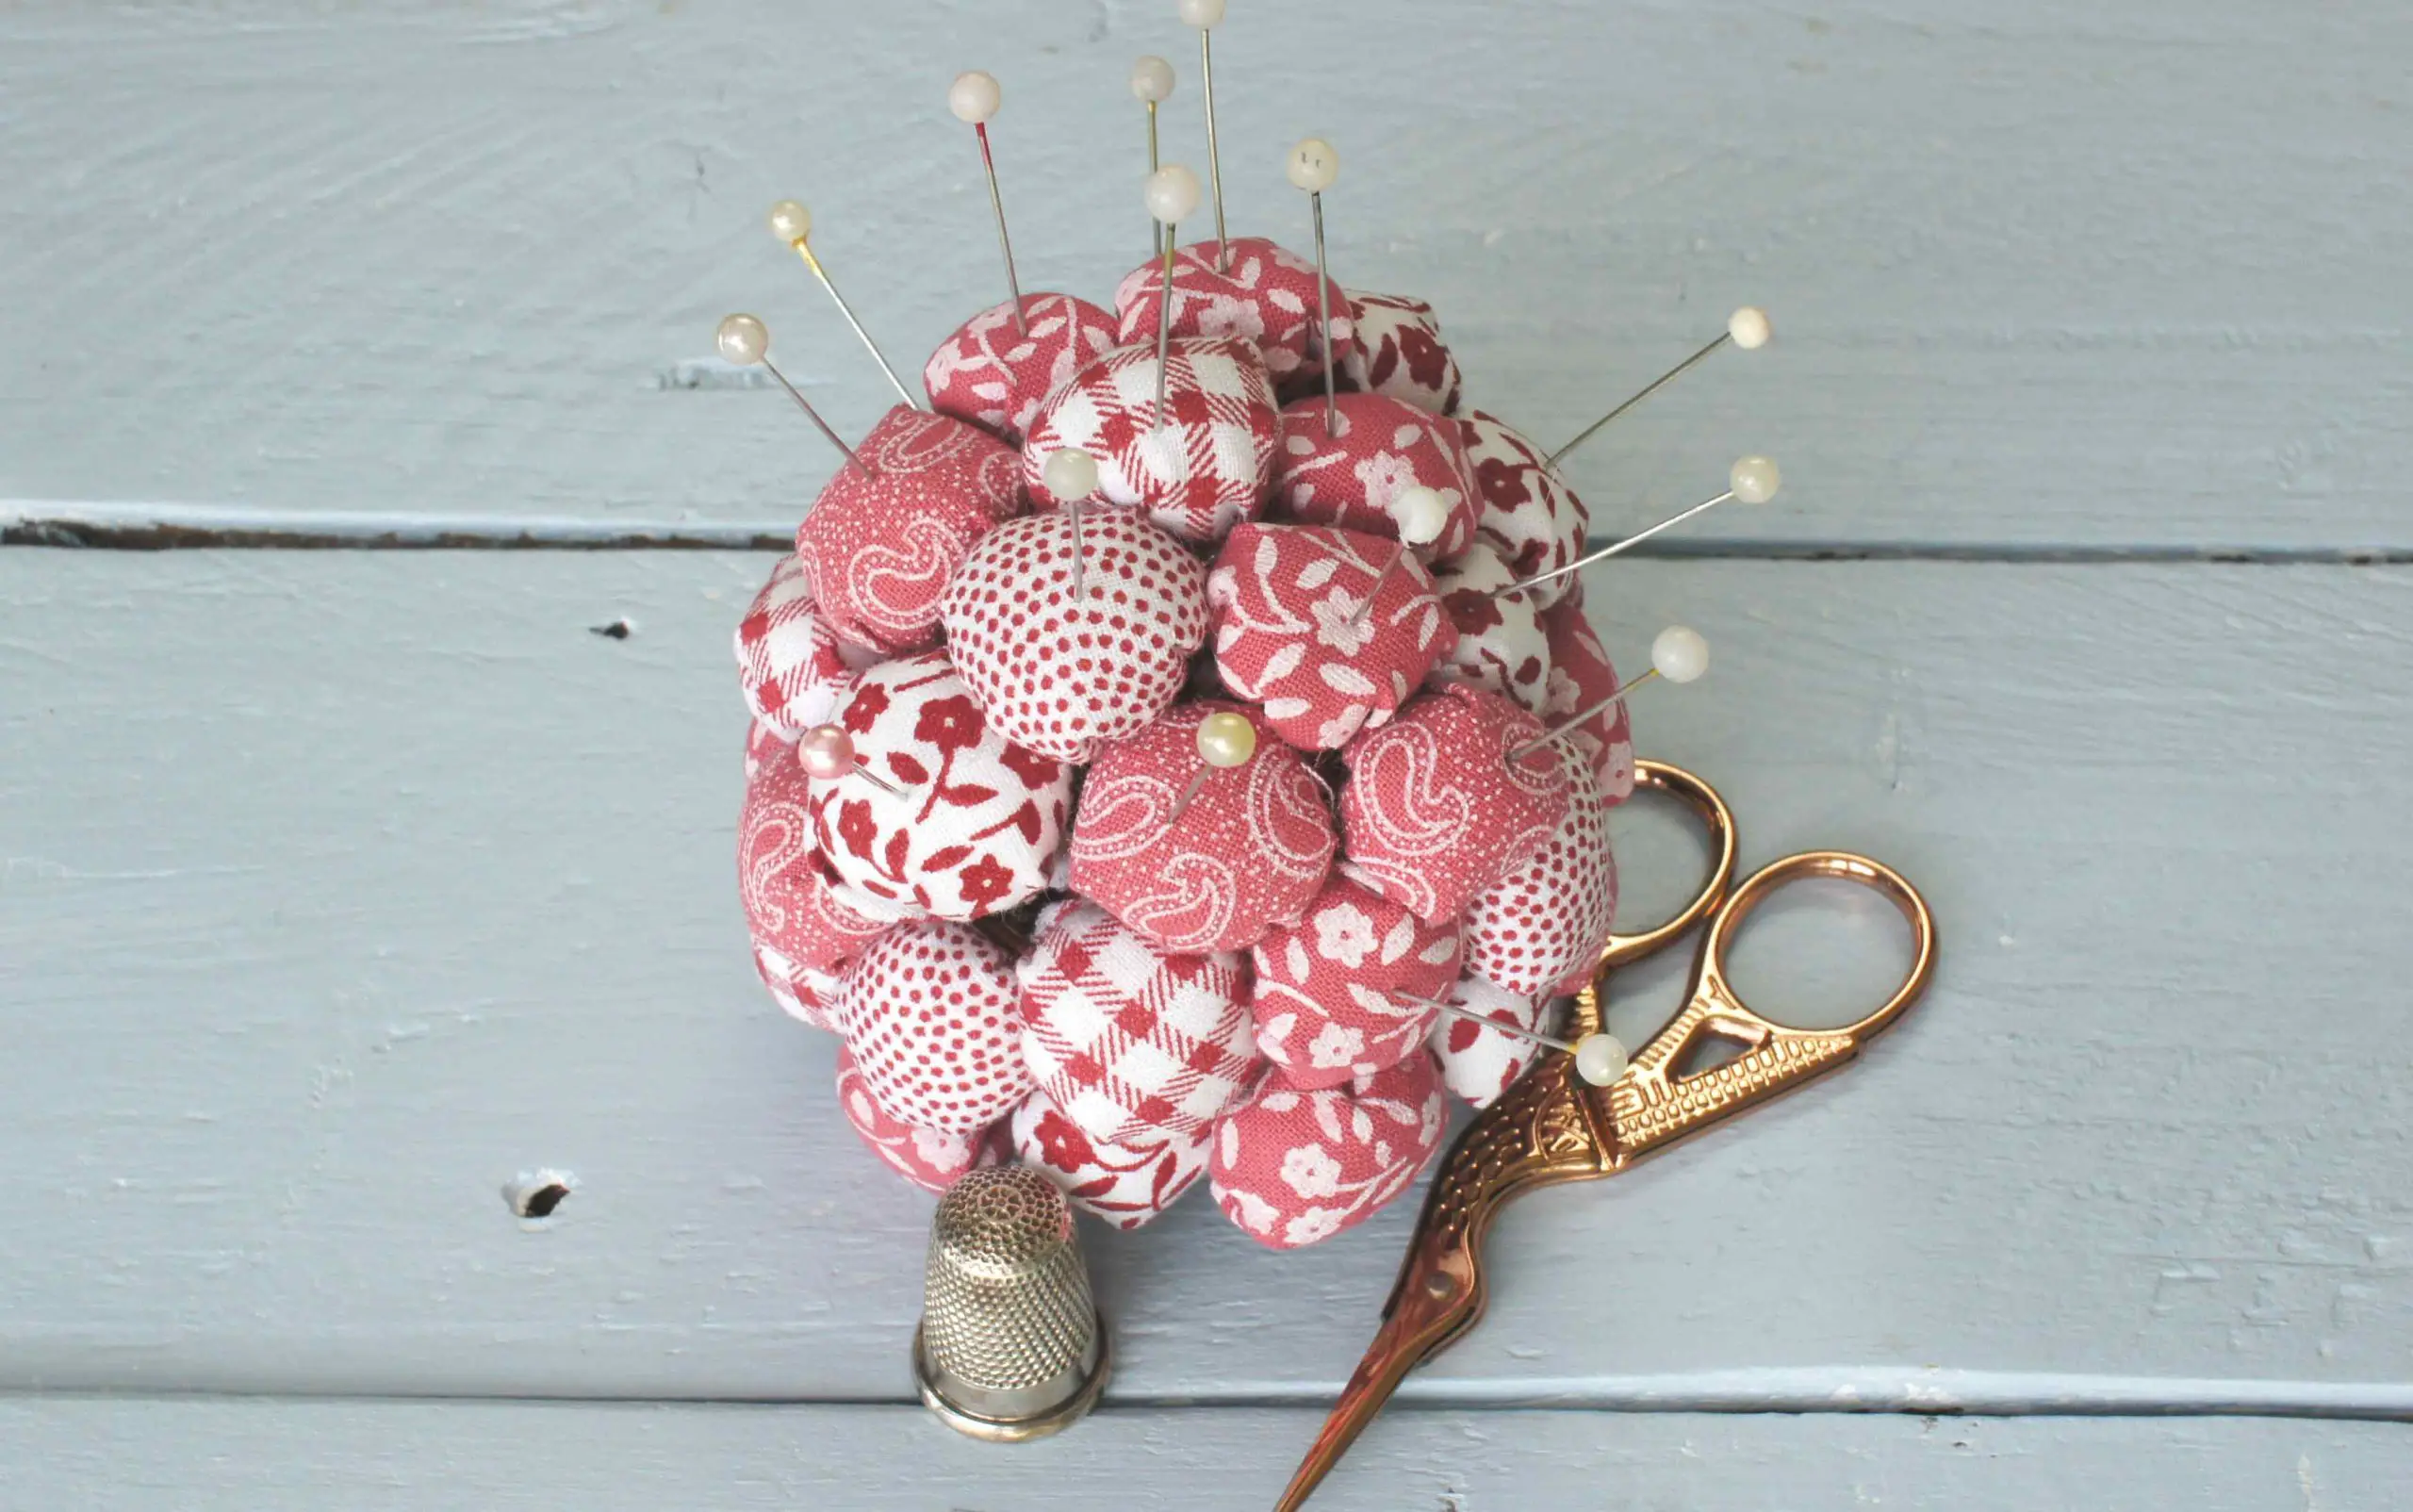 How to Make a Pincushion/ Easy Sewing Project - Sew Crafty Me